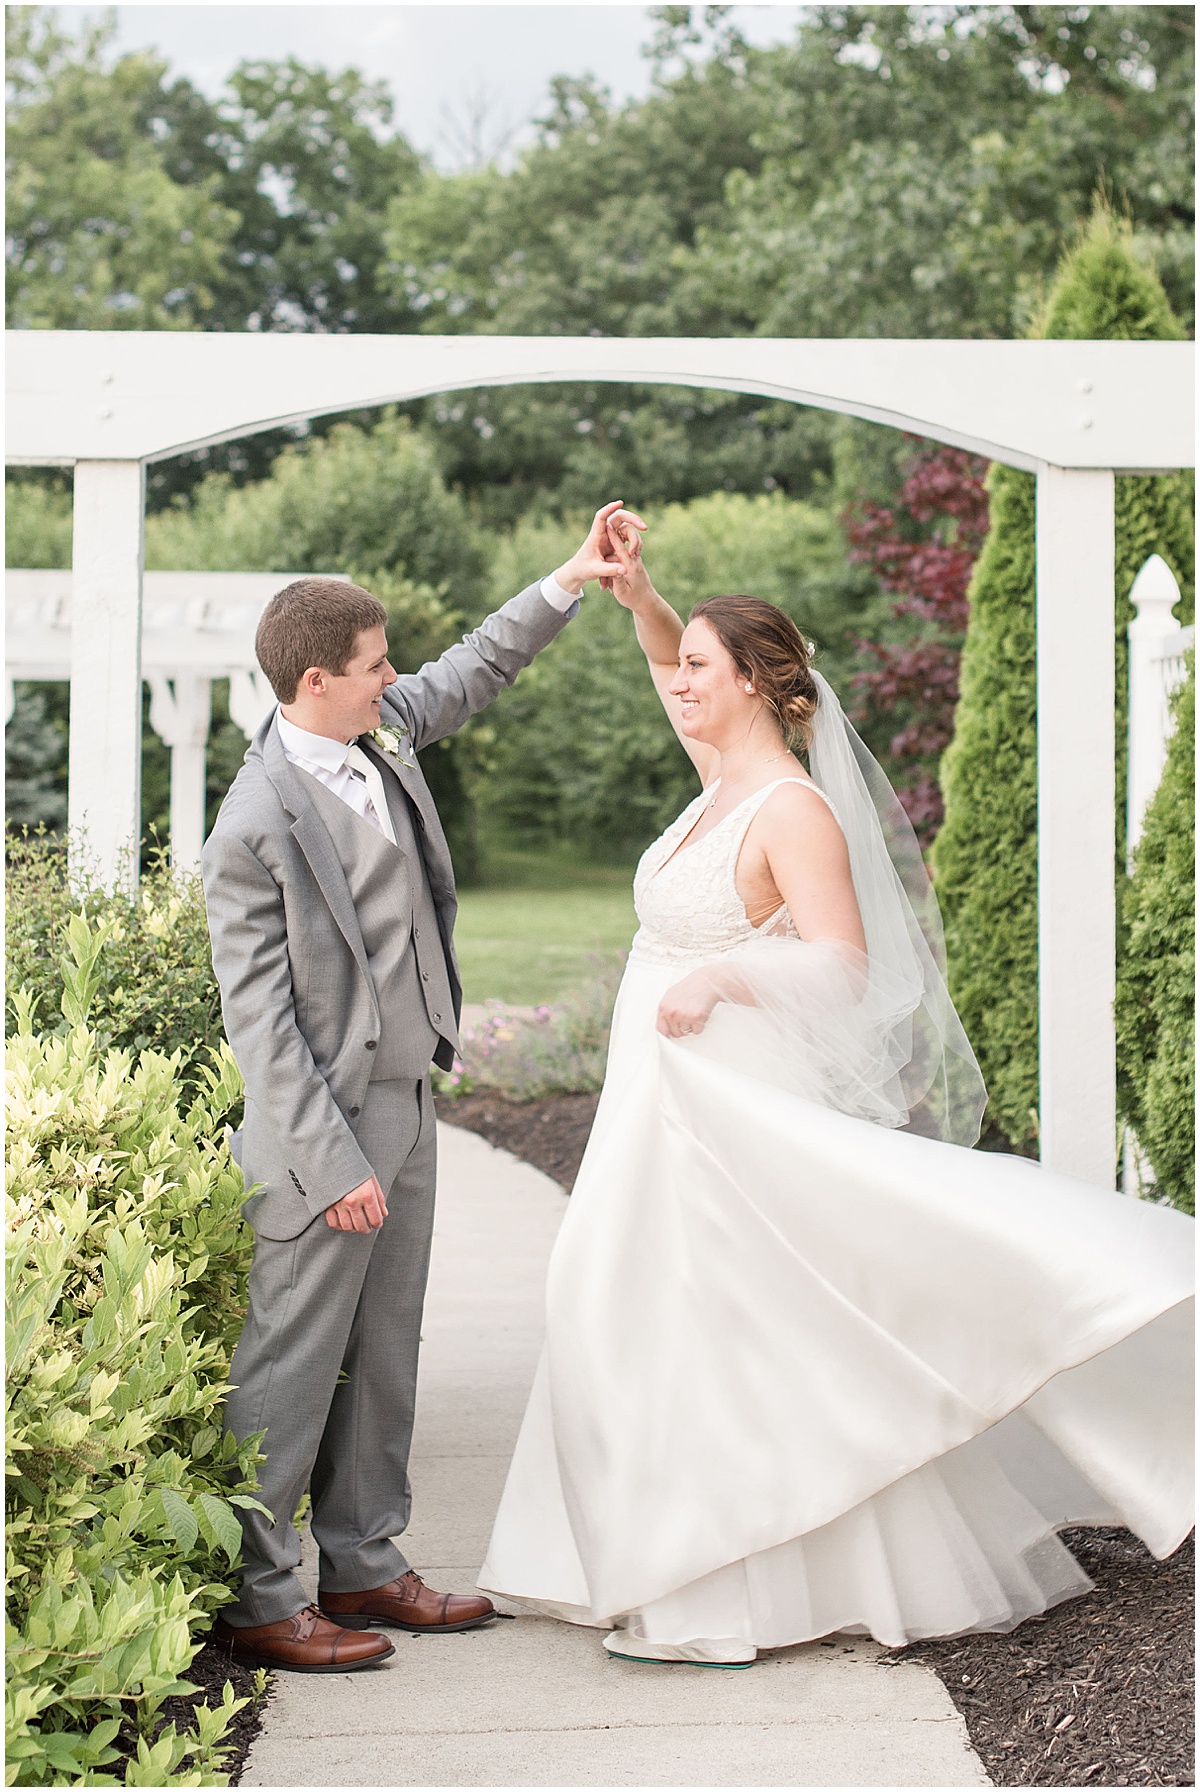 Wedding in Indianapolis photographed by Victoria Rayburn Photography